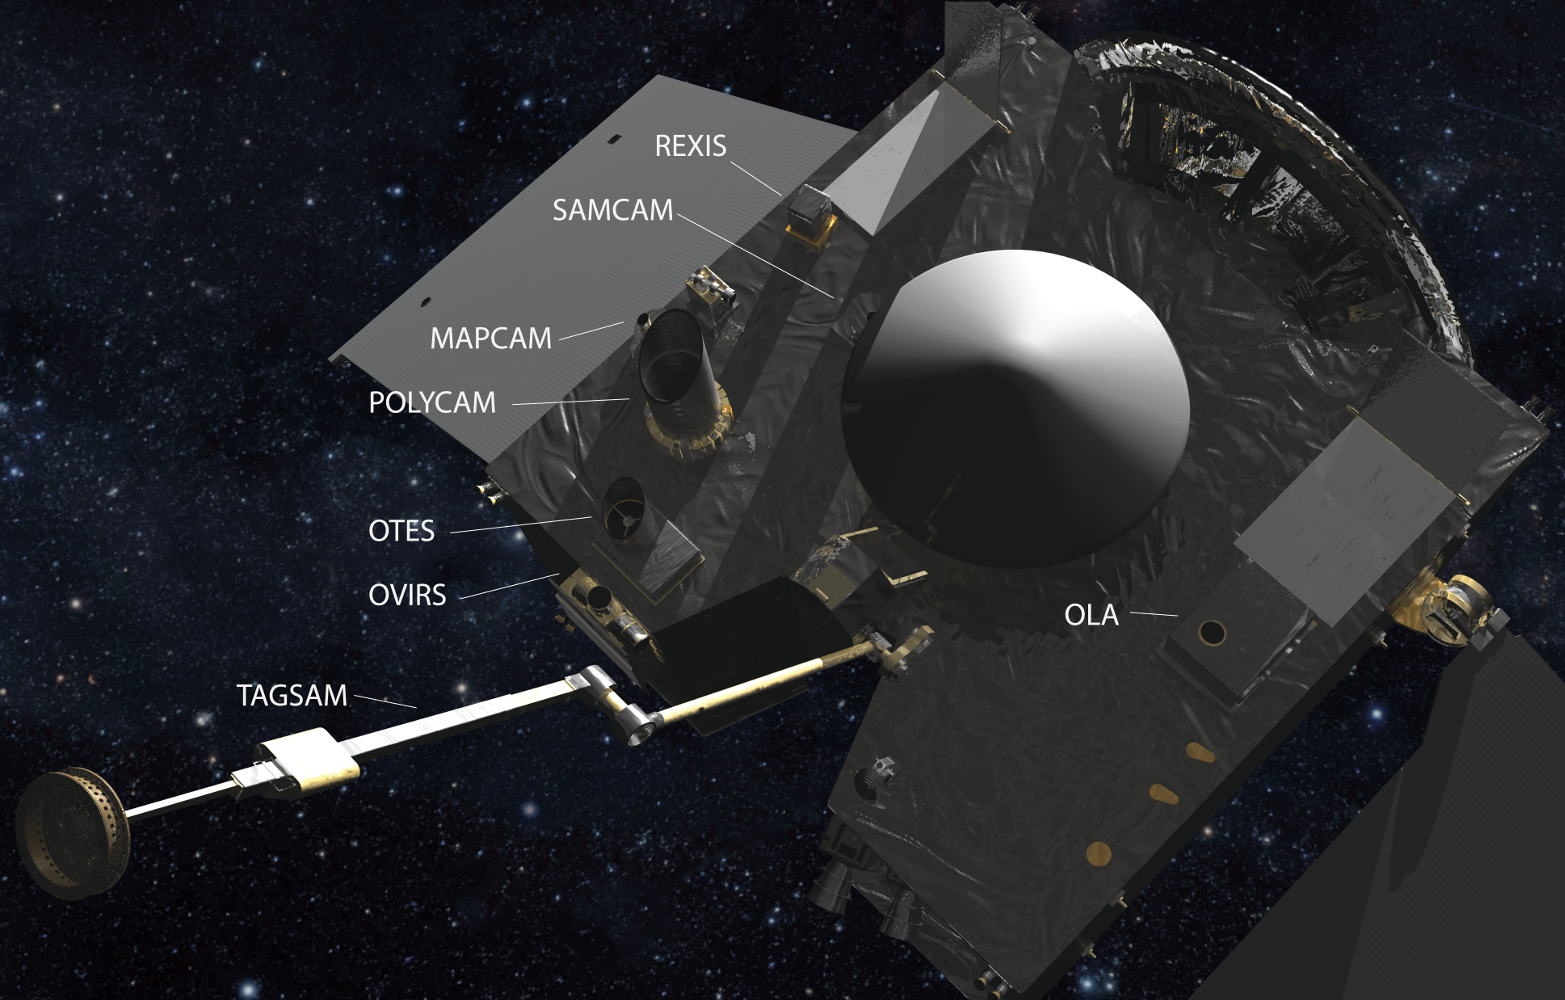 OSIRIS-REx’s instrument deck consists of various imaging devices that will study Bennu at a variety of wavelengths. Source: NASA/Goddard/University of Arizona